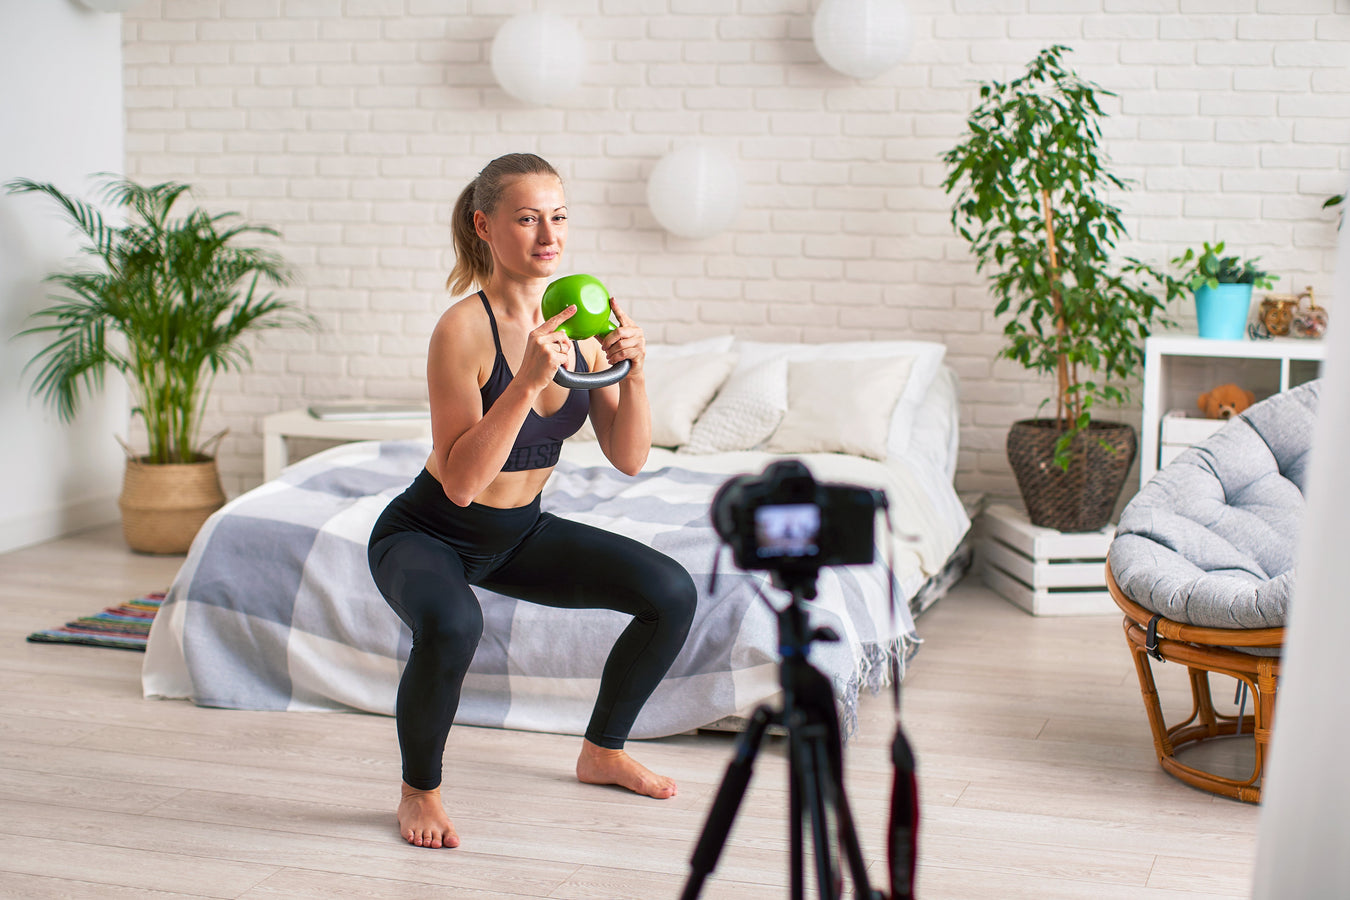 Fitness instructor using camera to stream virtual classes on video